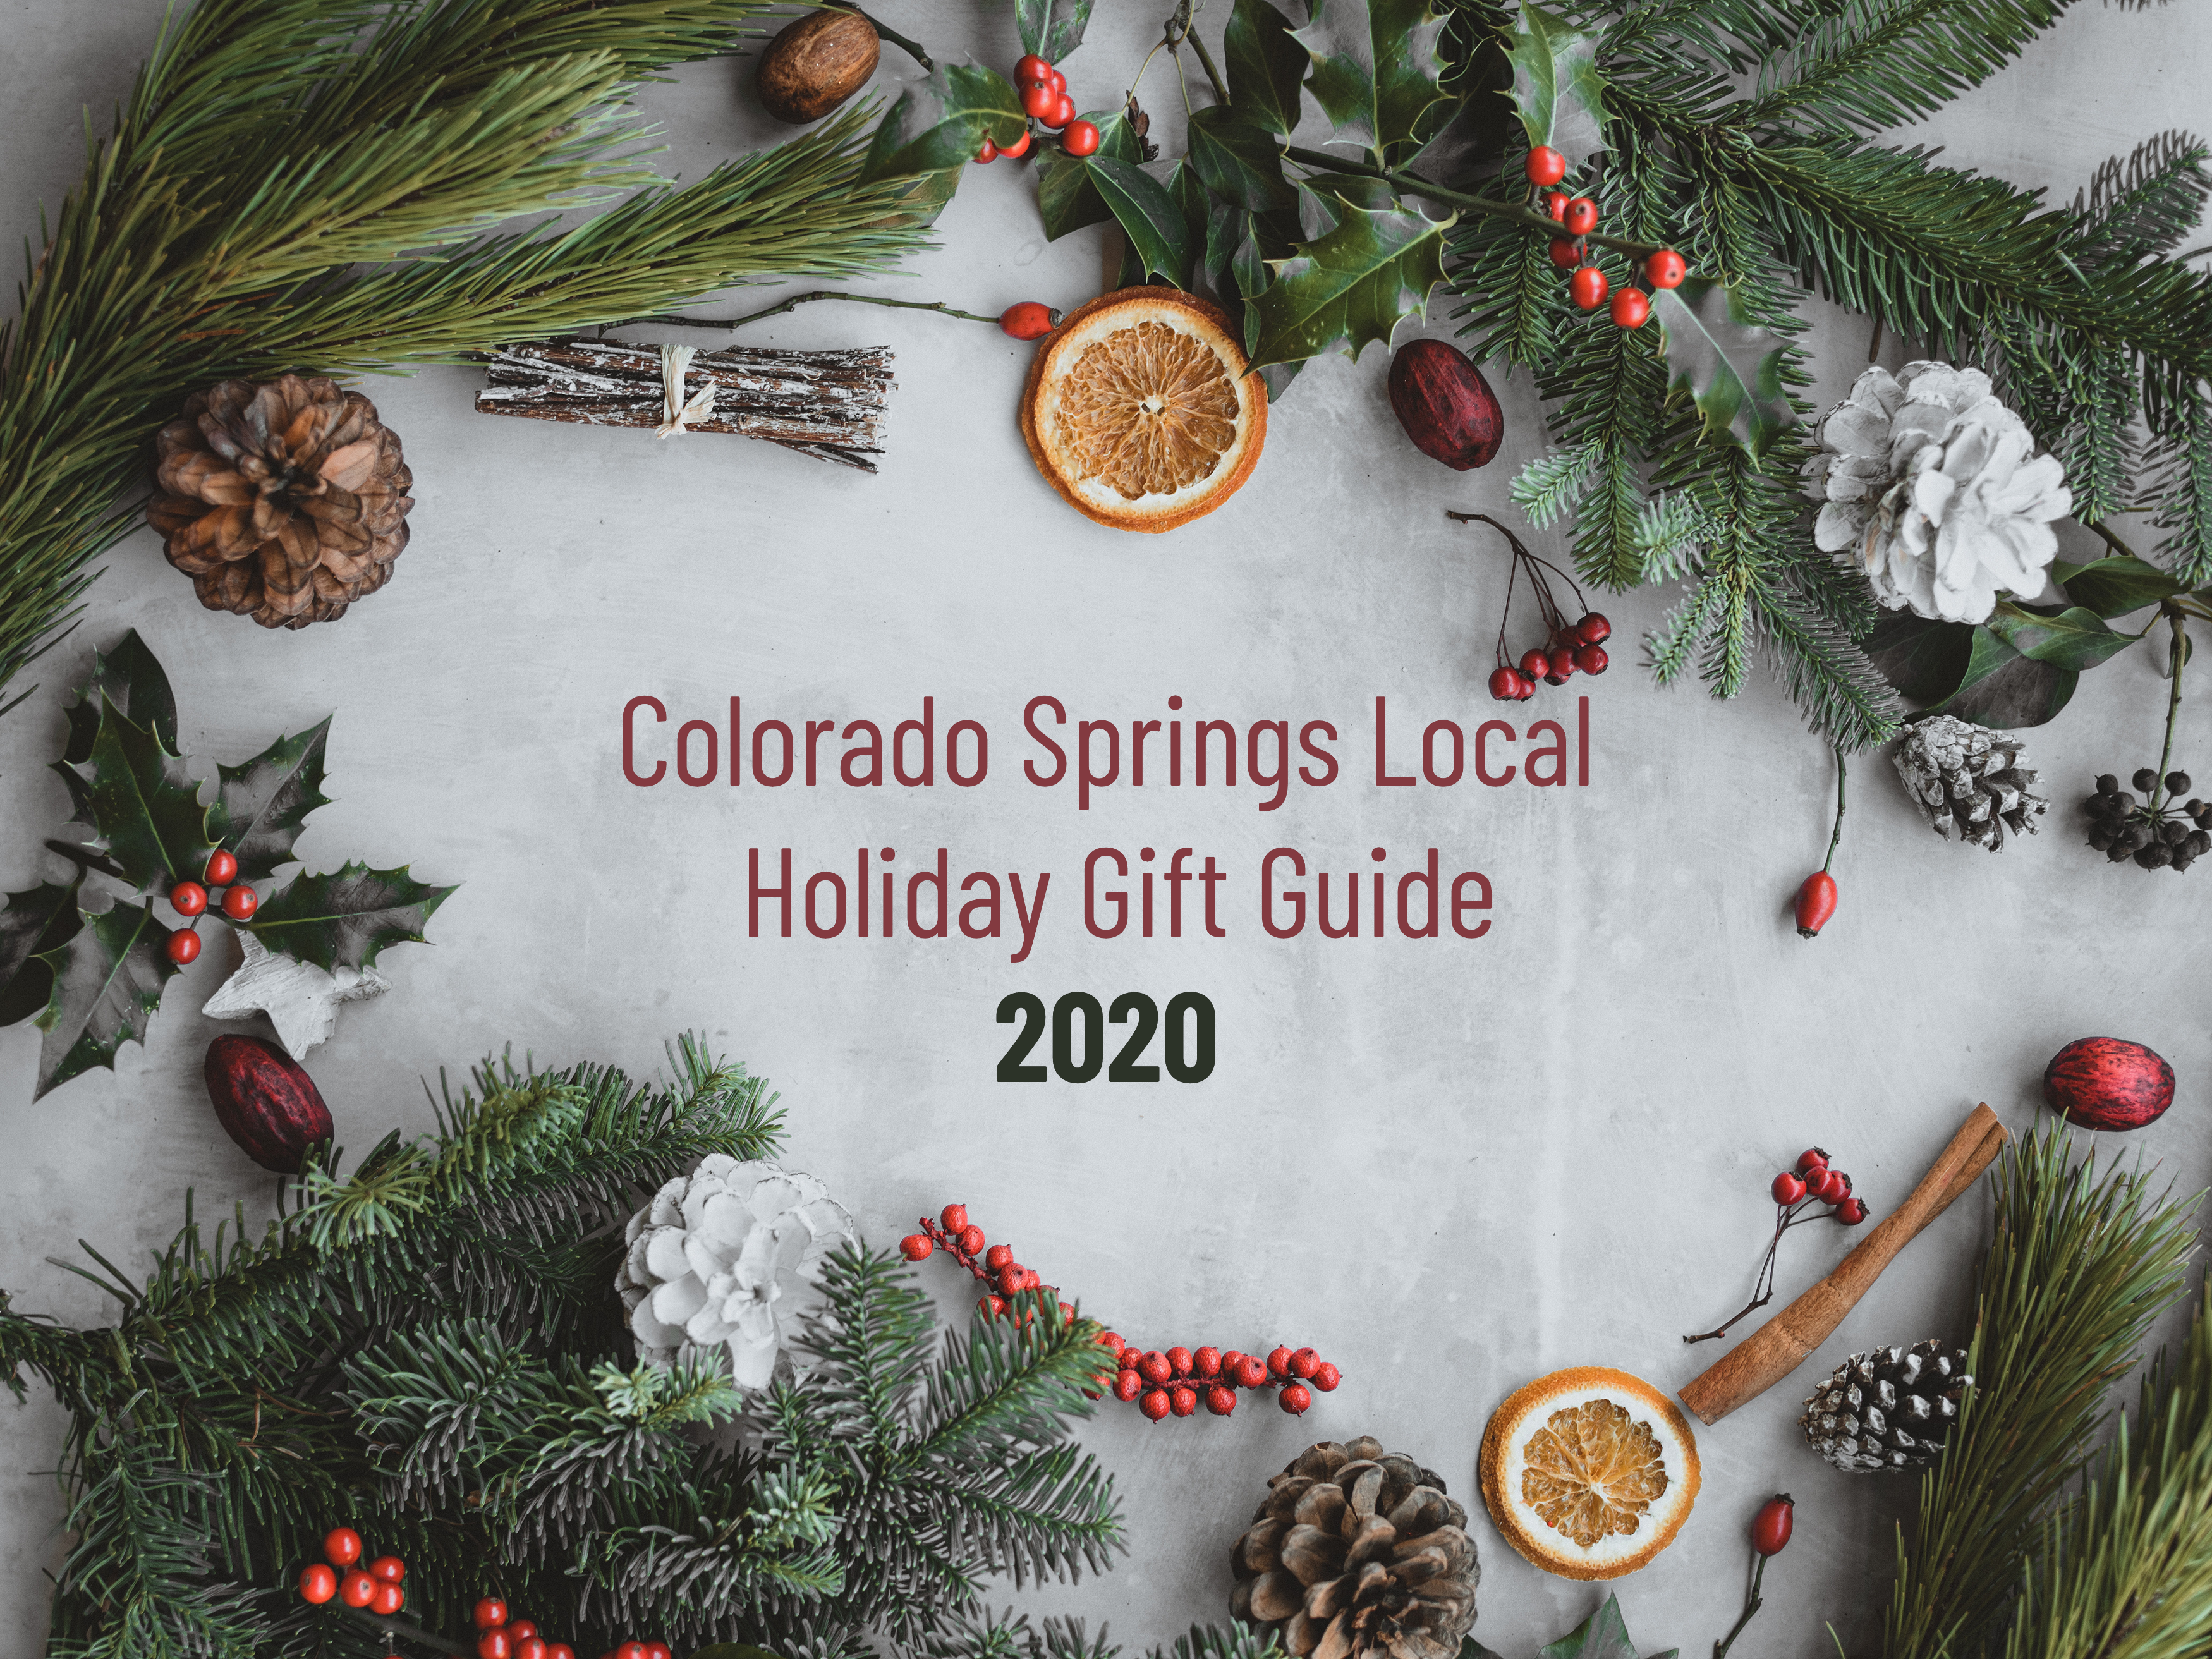 Colorado Springs Local Holiday Gift Guide